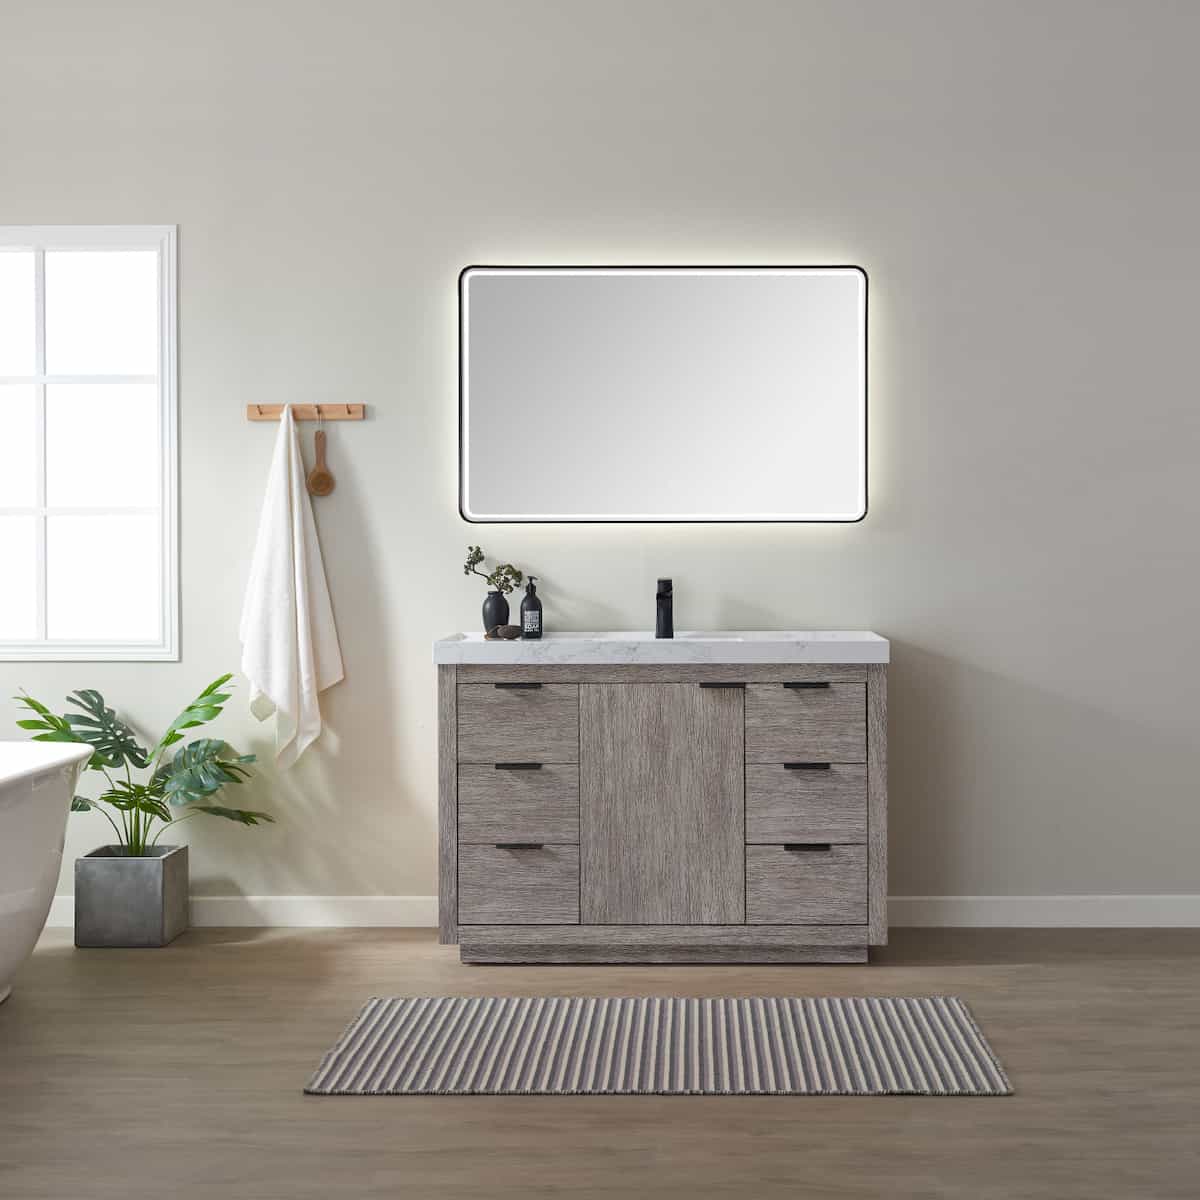 Vinnova Leiza 48 Inch Freestanding Single Sink Vanity in Classical Grey with White Composite Grain Countertop With Mirror in Bathroom 701548-CR-GW